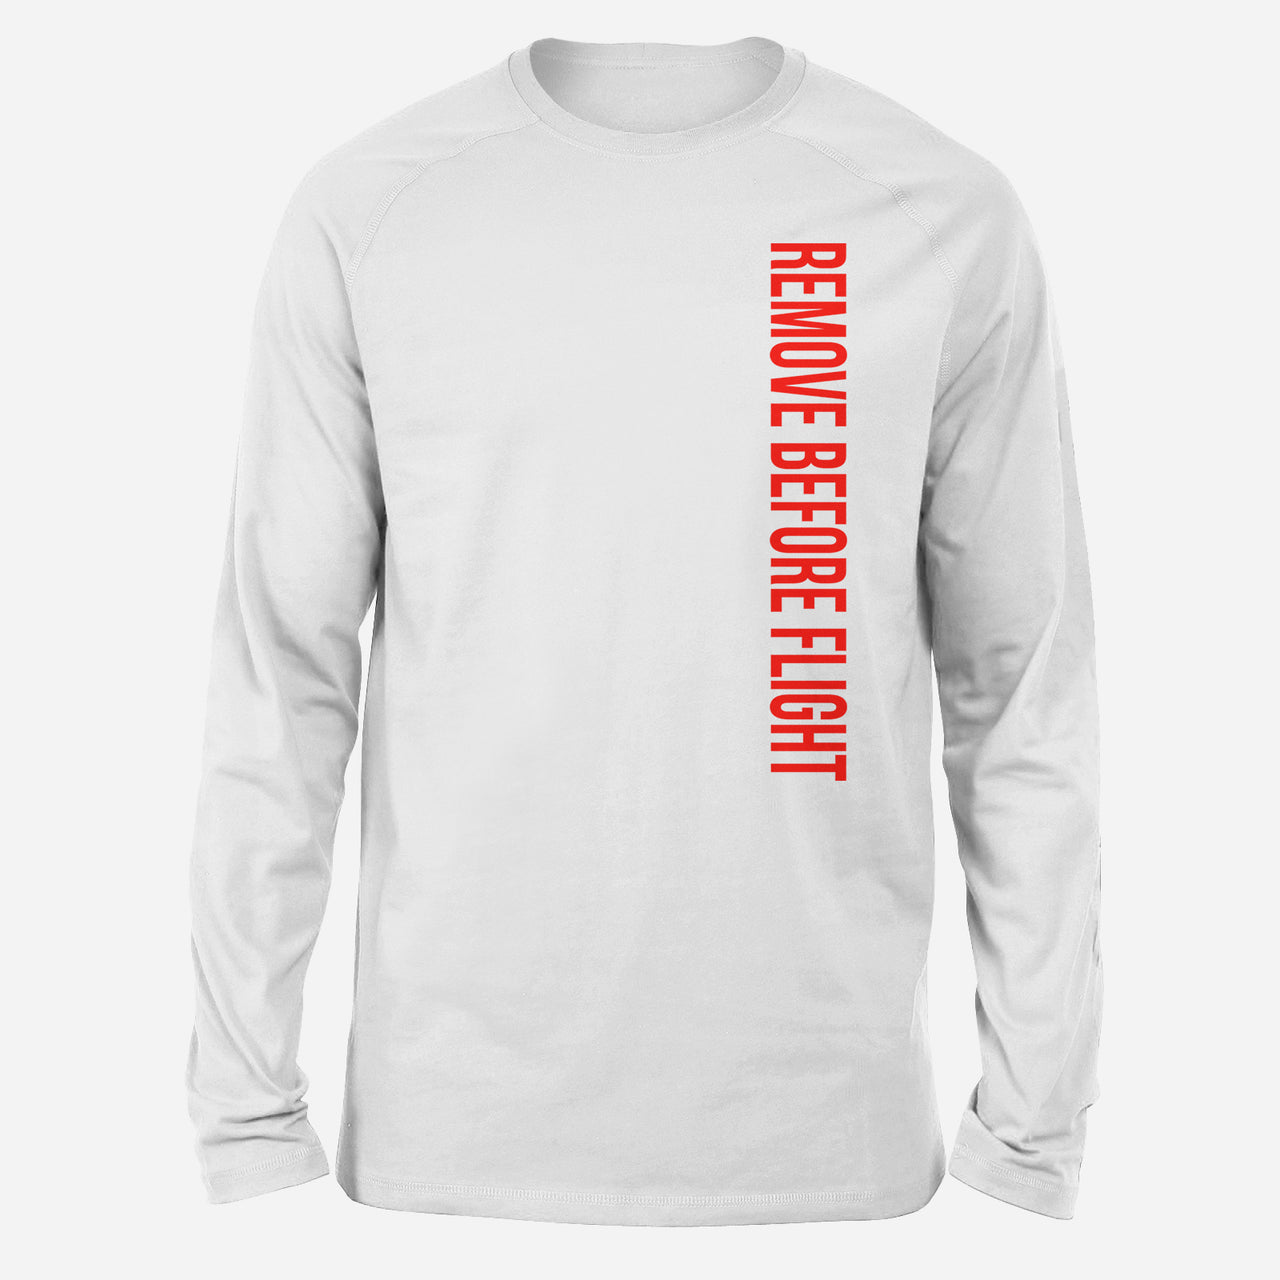 Remove Before Flight 2 Designed Long-Sleeve T-Shirts